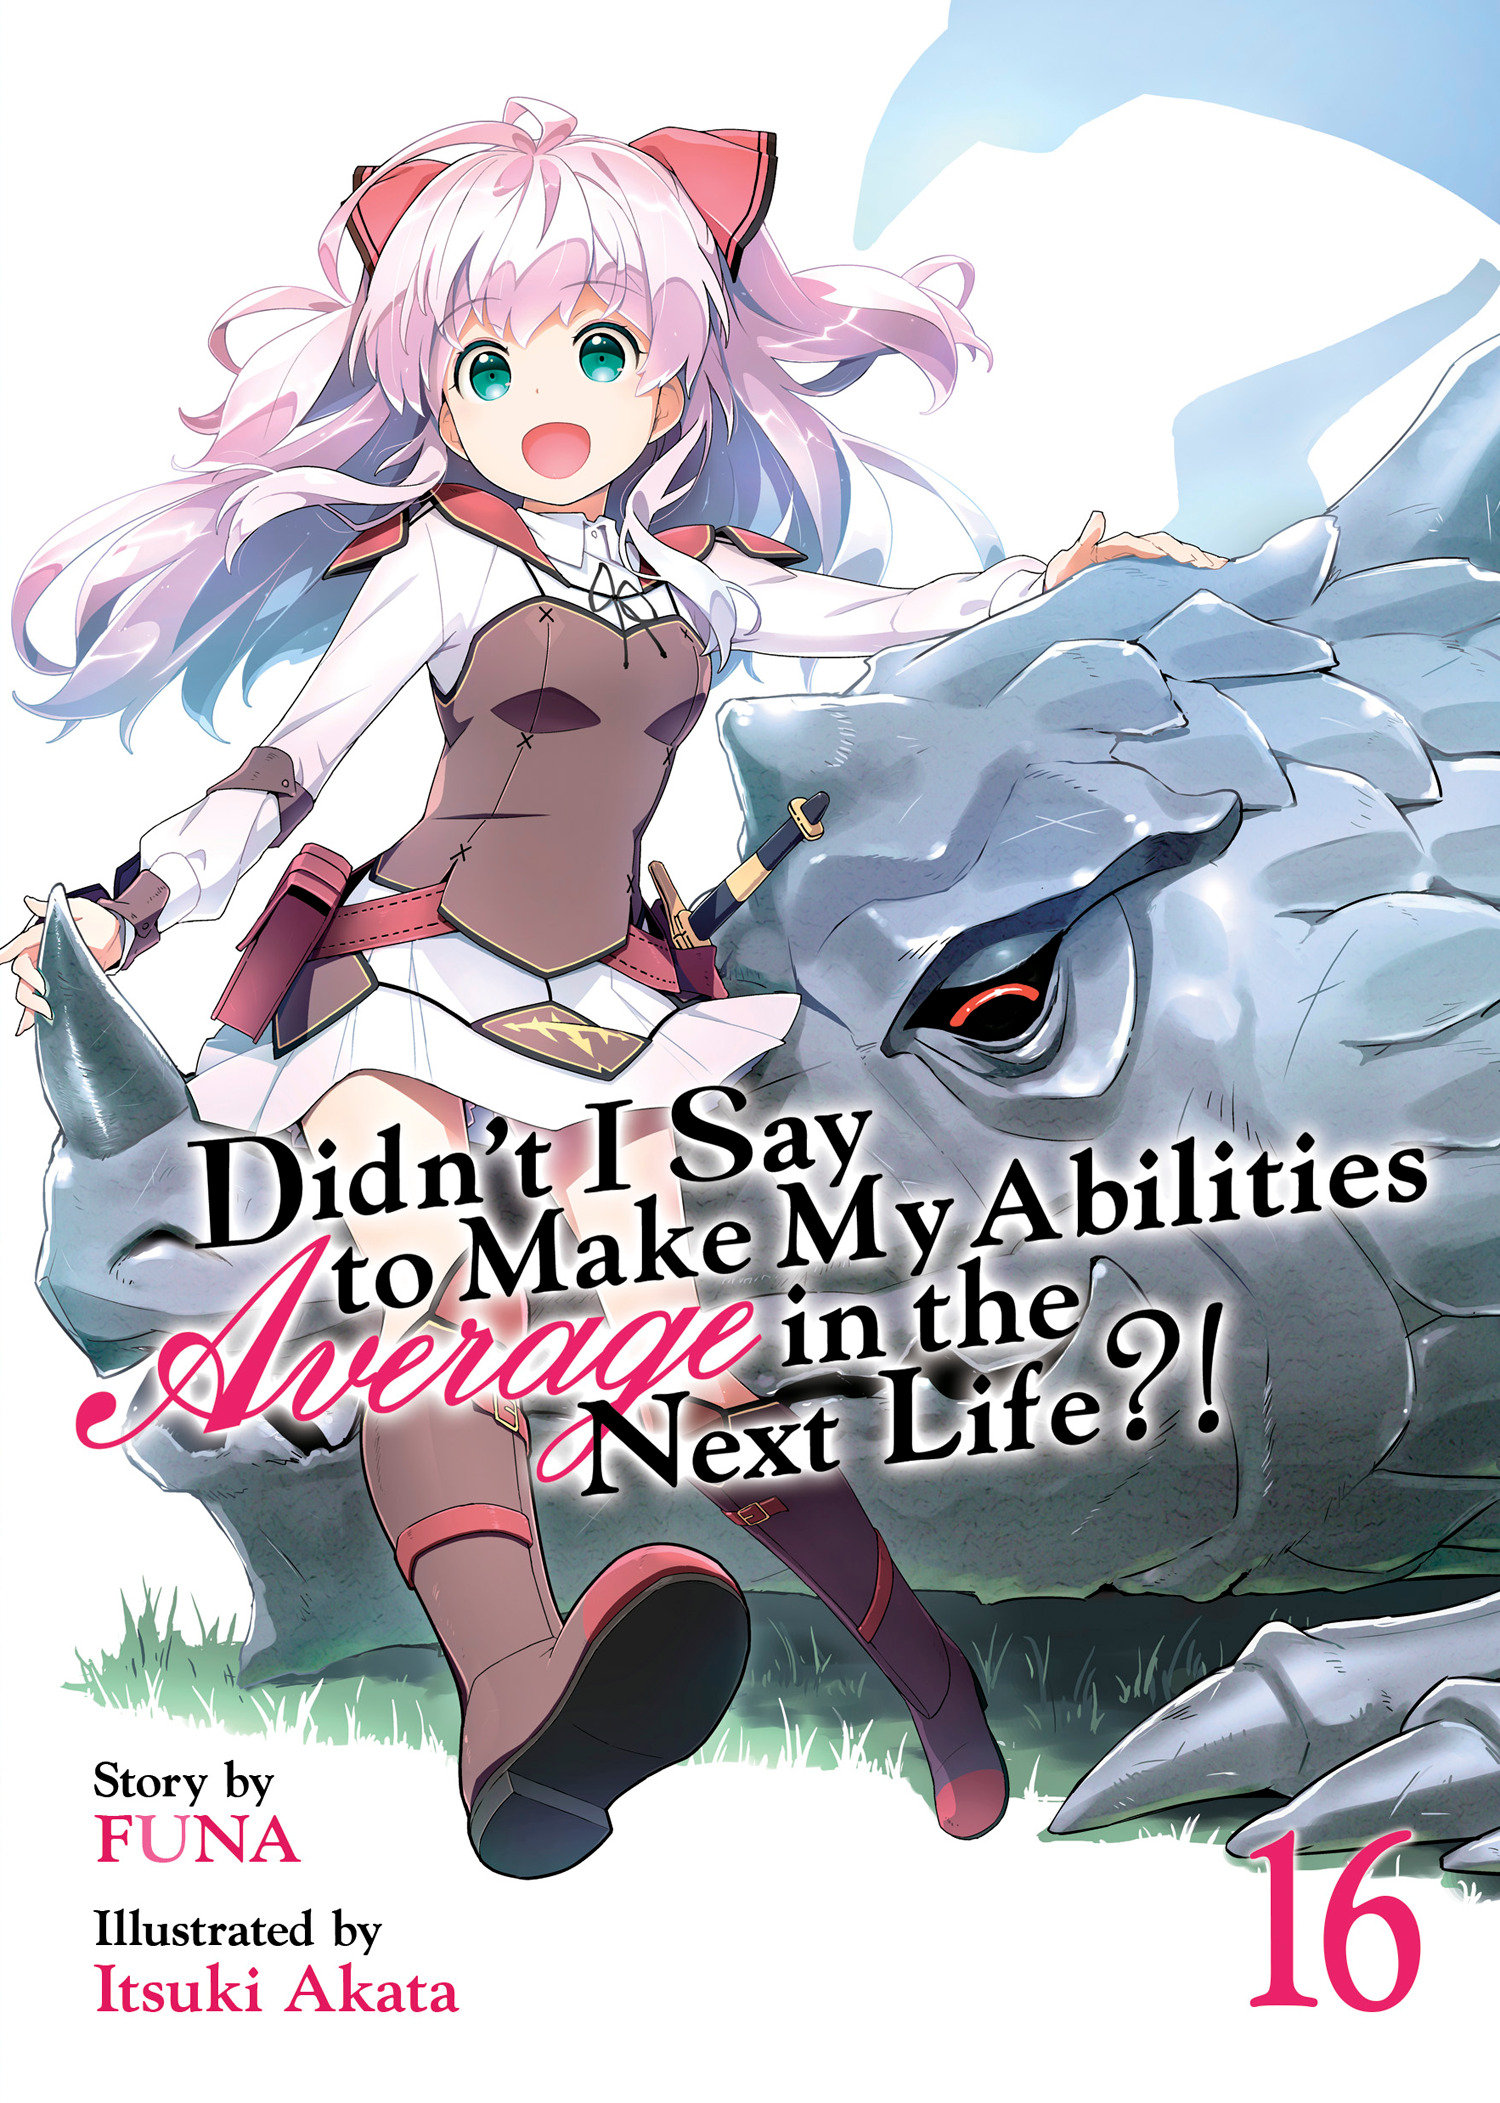 Didn't I Say to Make My Abilities Average in the Next Life?! Light Novel Volume 16